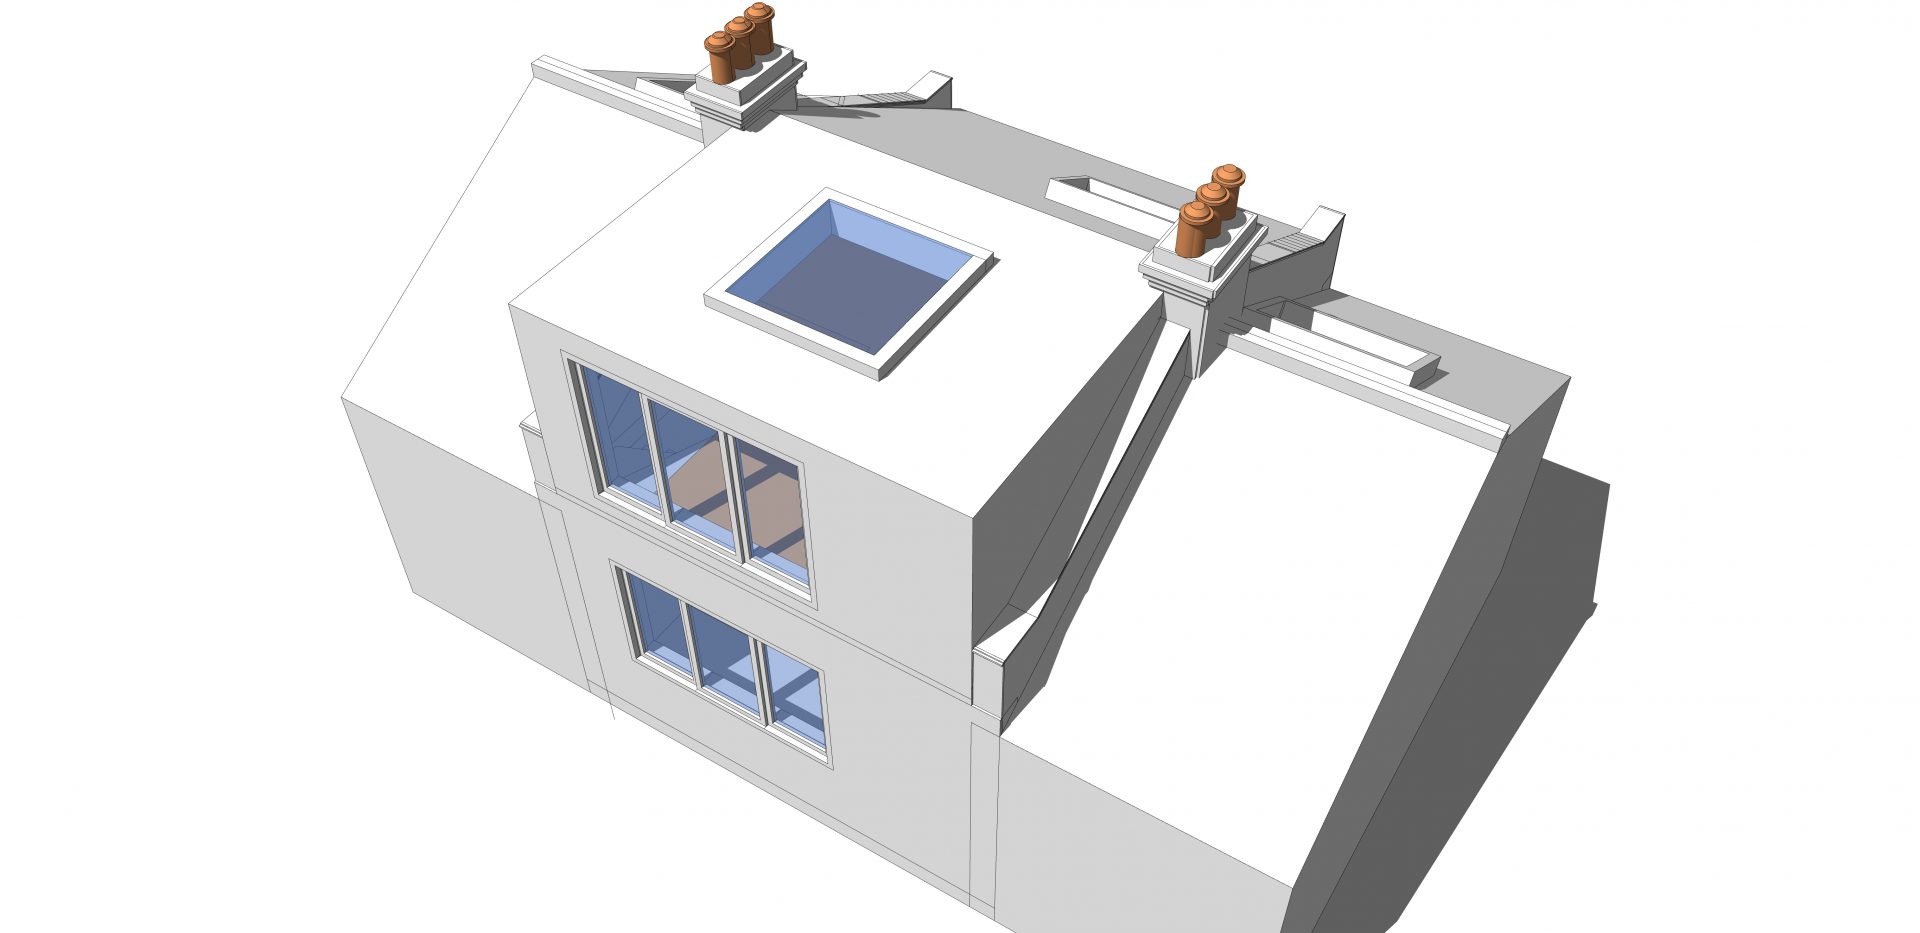 image showing a 3d model of a small studio extension project